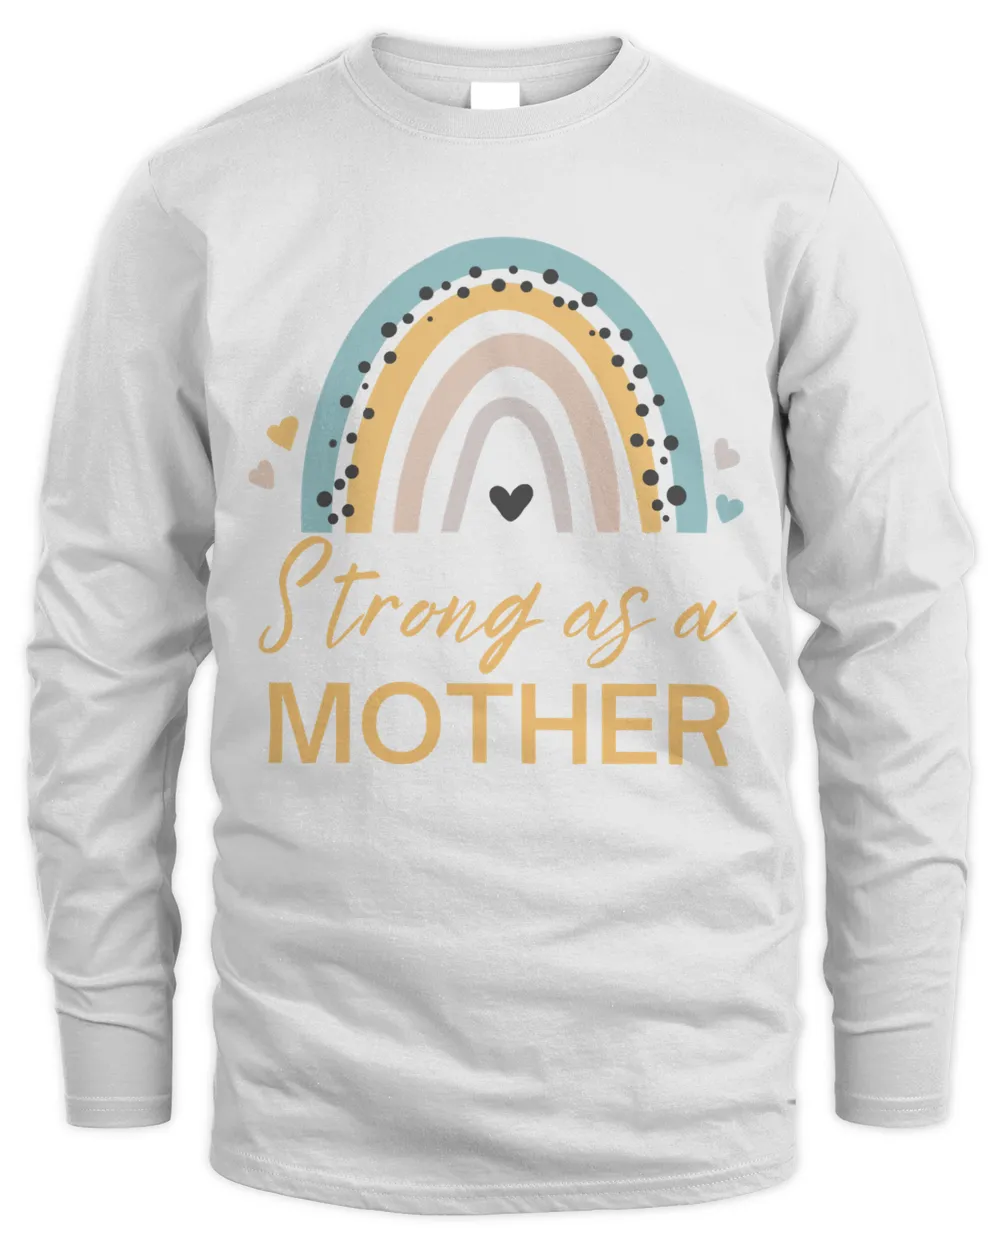 Strong as a Mother Blue Rainbow Classic T-Shirt